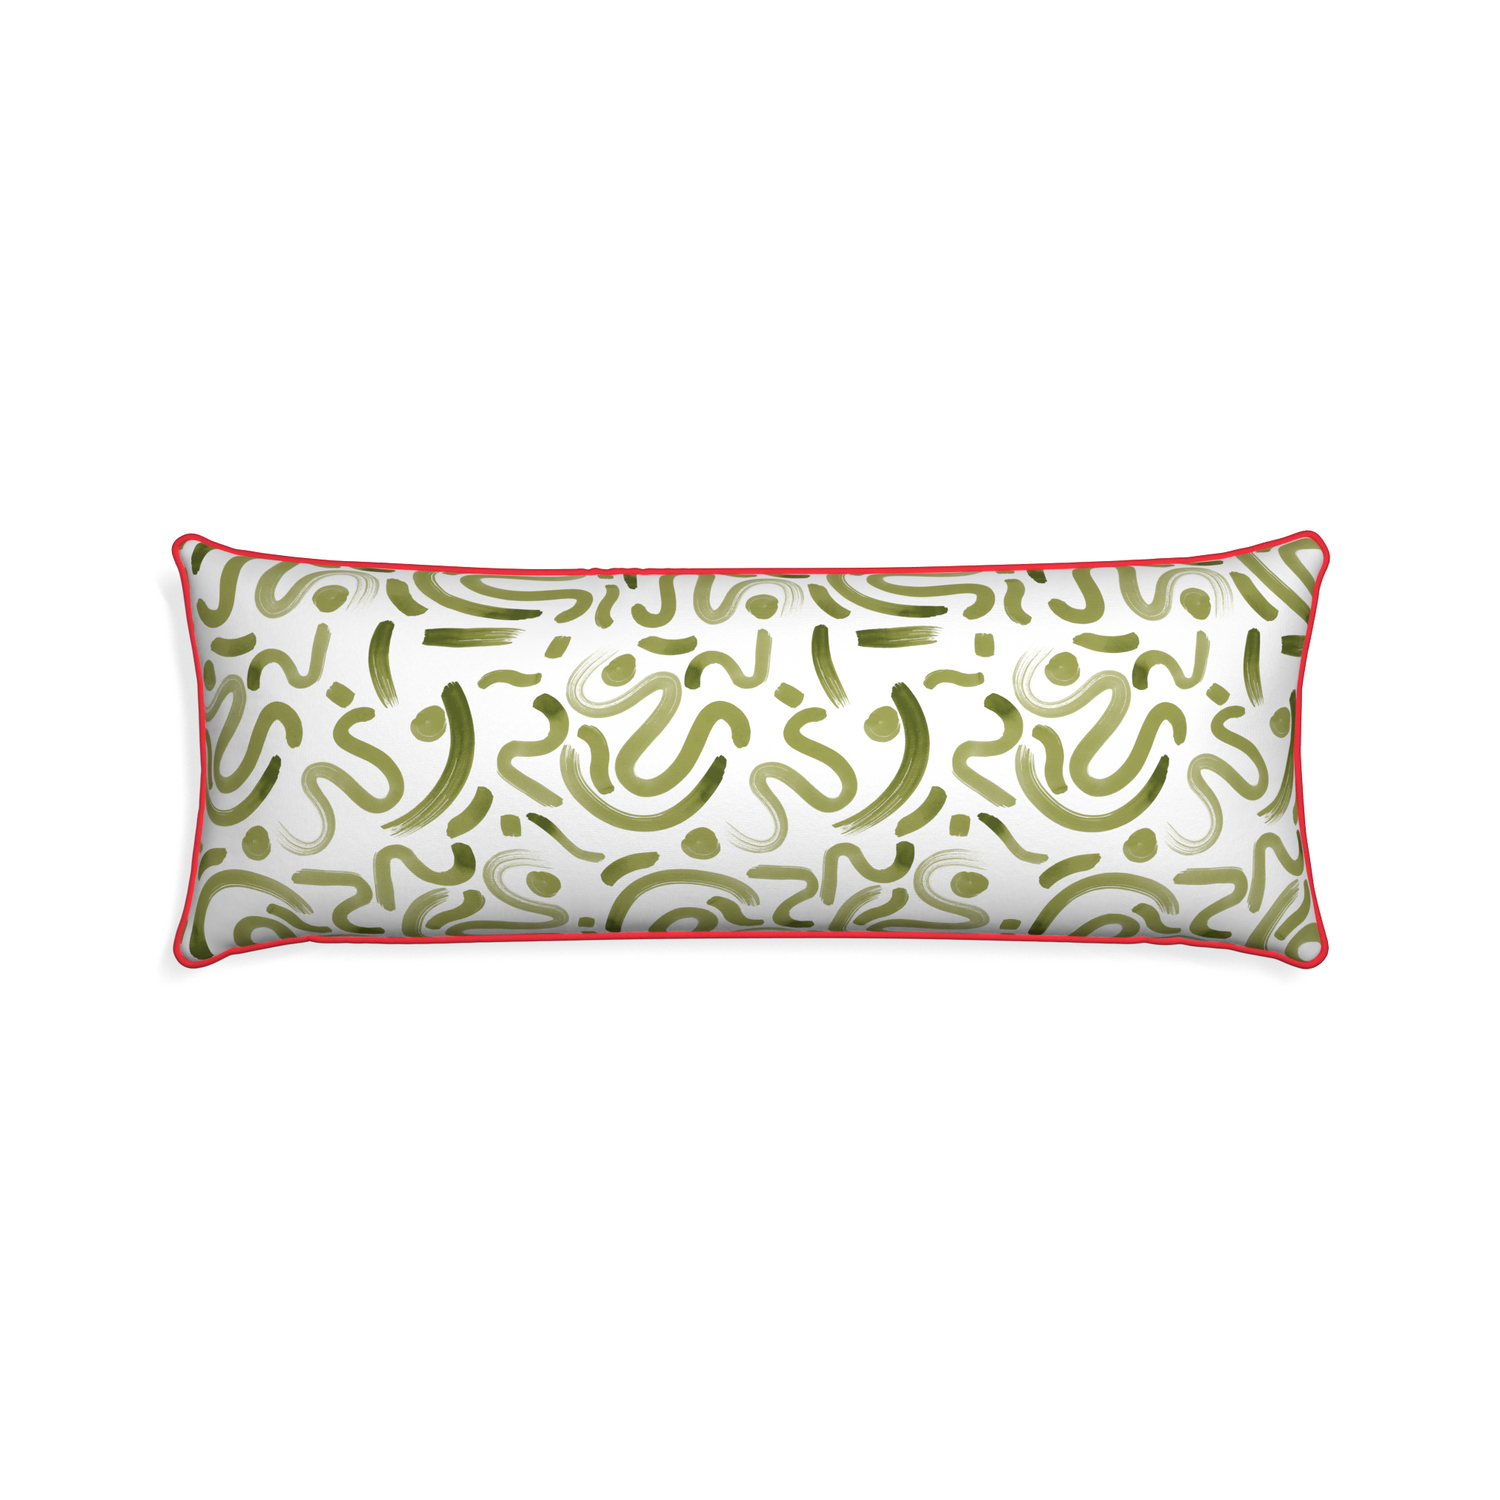 Xl-lumbar hockney moss custom pillow with cherry piping on white background